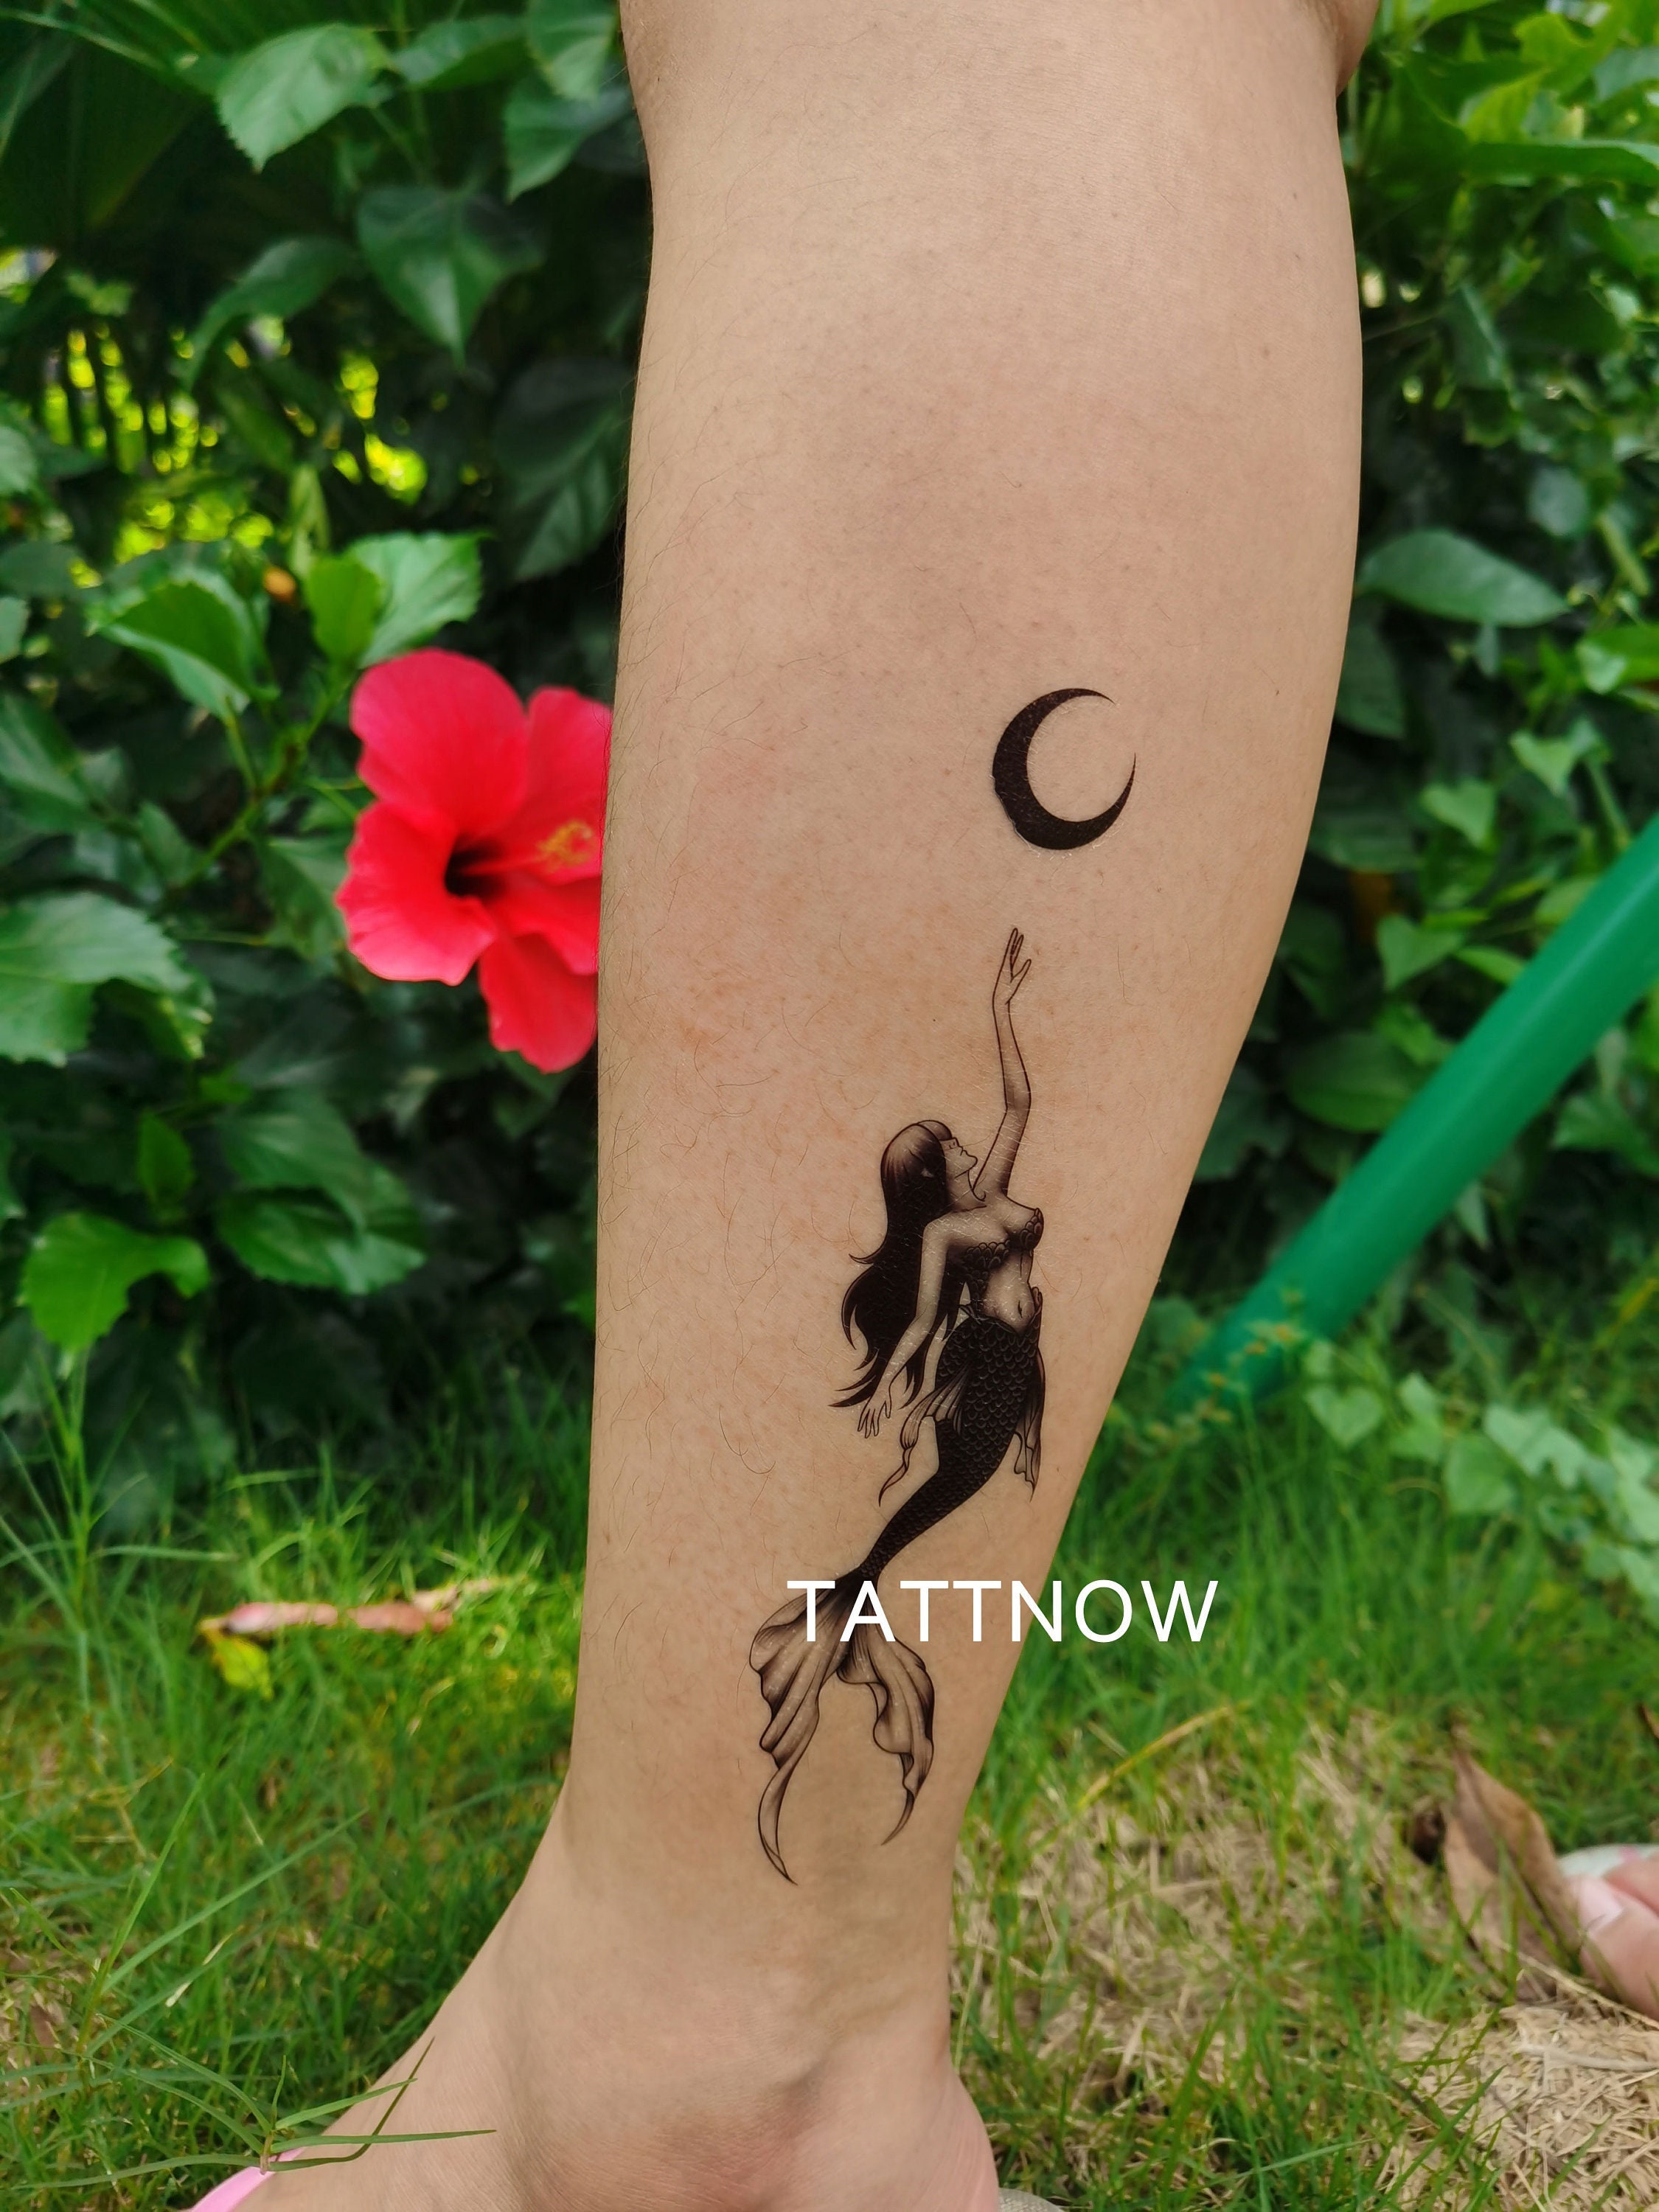 S.A.V.I Temporary Tattoo Stickers, Sea Mermaid Long Hair Flower Moon Design  For Men, Women Size 21x11cm - 1Pc. : Amazon.in: Beauty